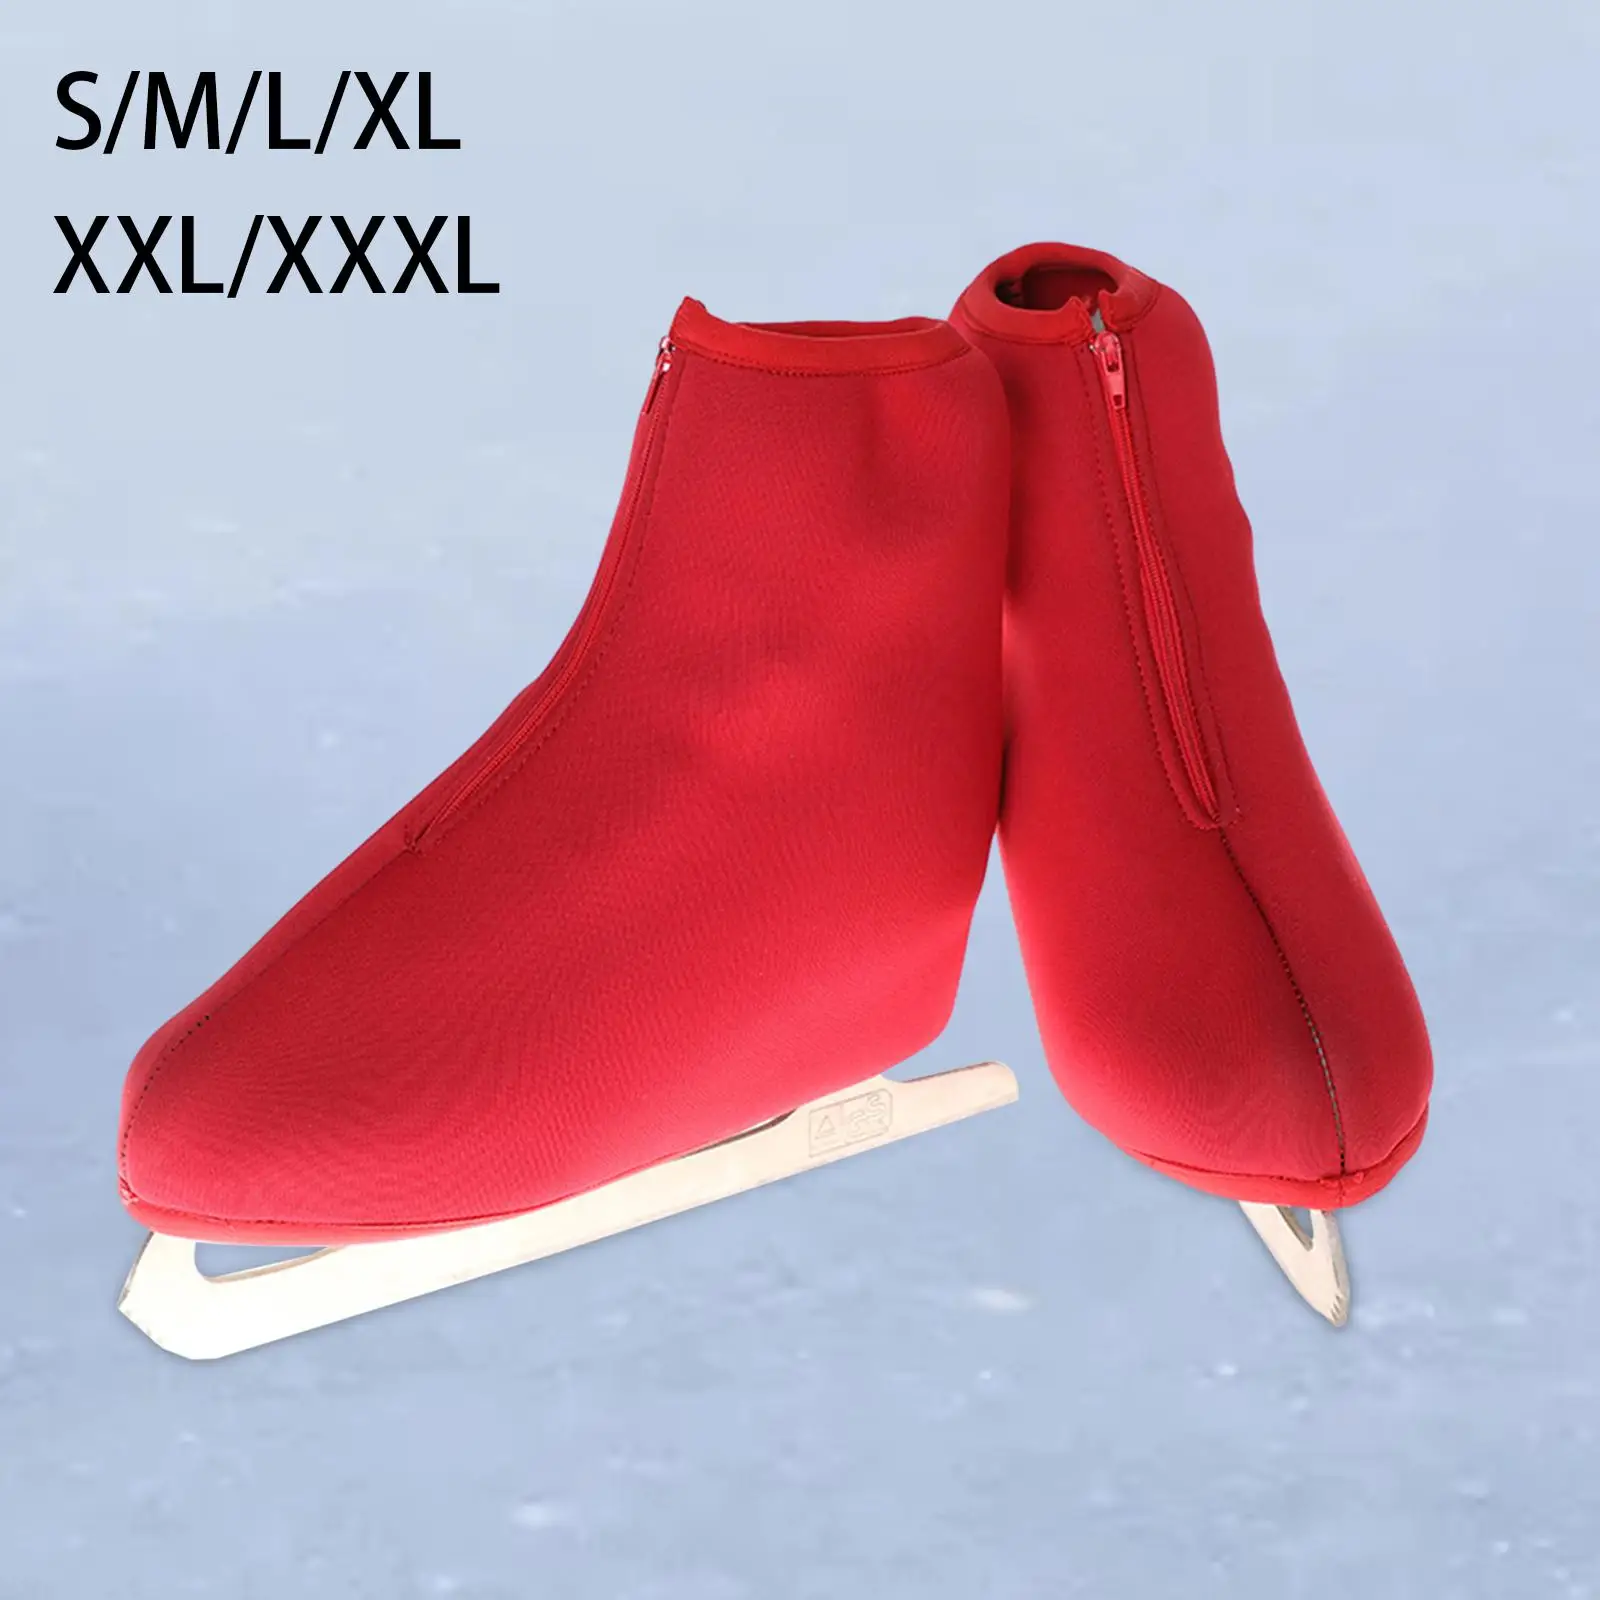 1 Pair Ice Skate Boot Covers Neoprene Accessories Durable Figure Skating Boot Covers for Roller Skates Ice Skating Figure Skates